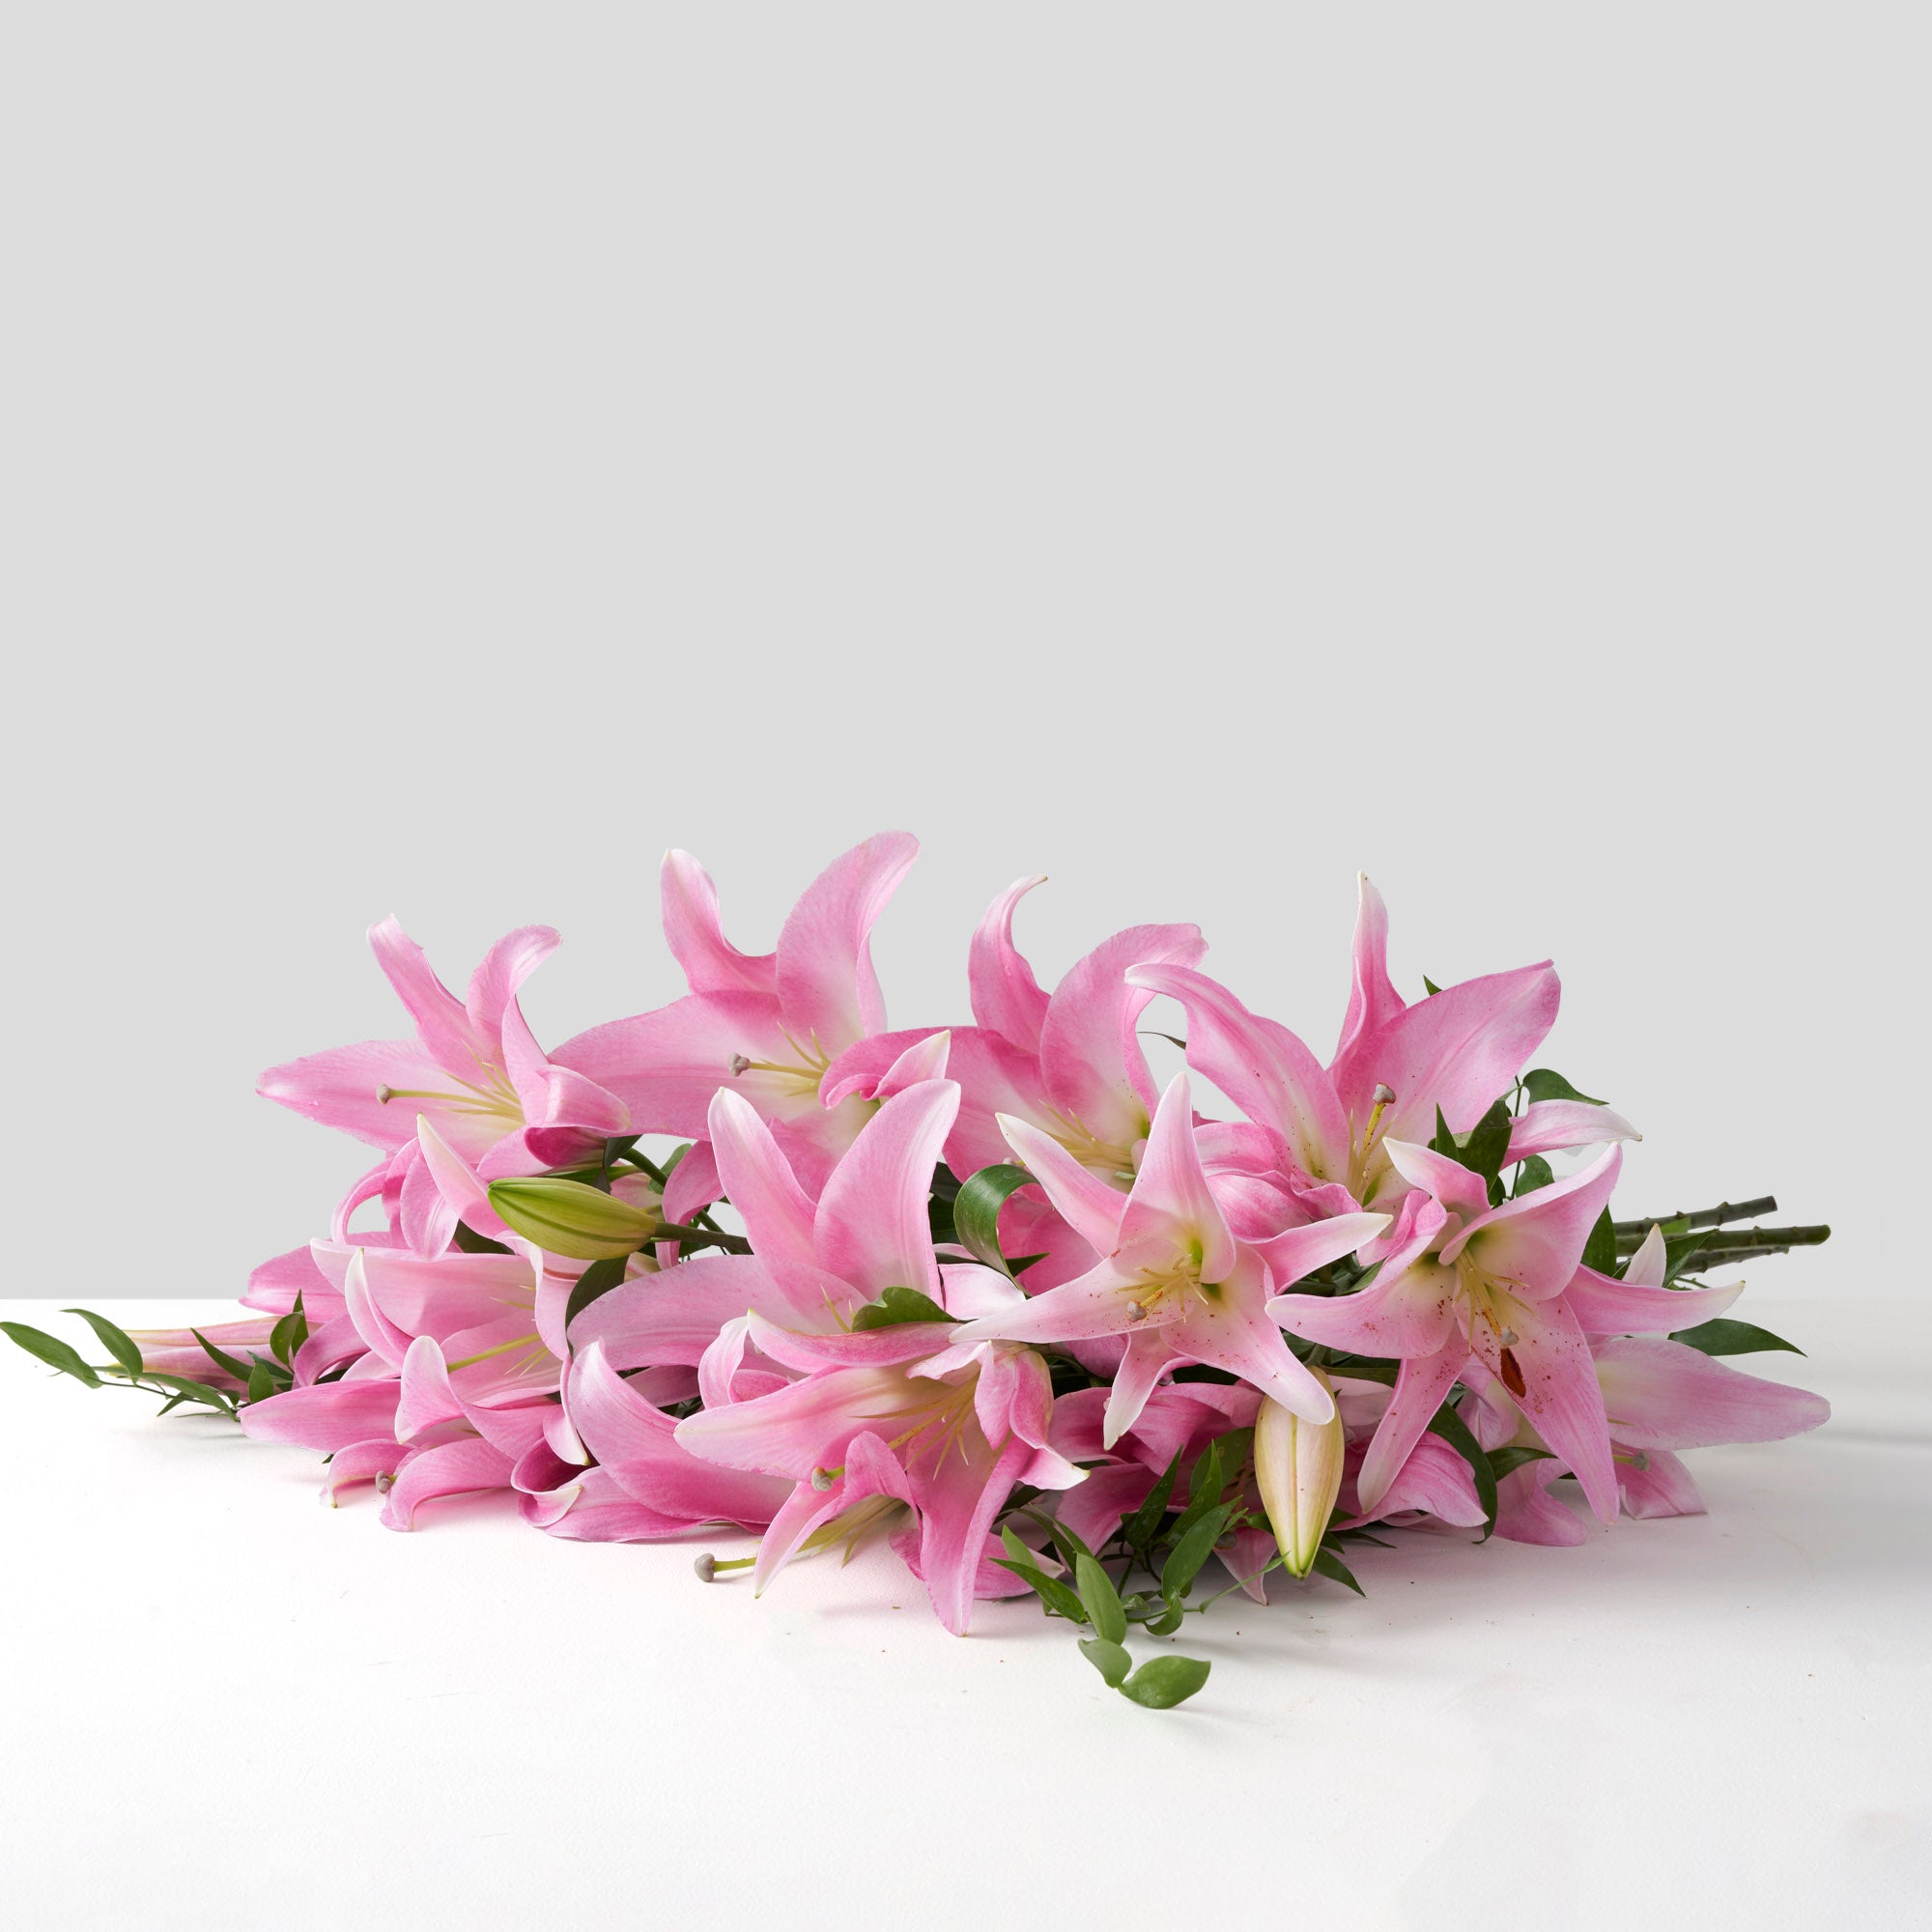 Bouquet of pink lilies on white background.